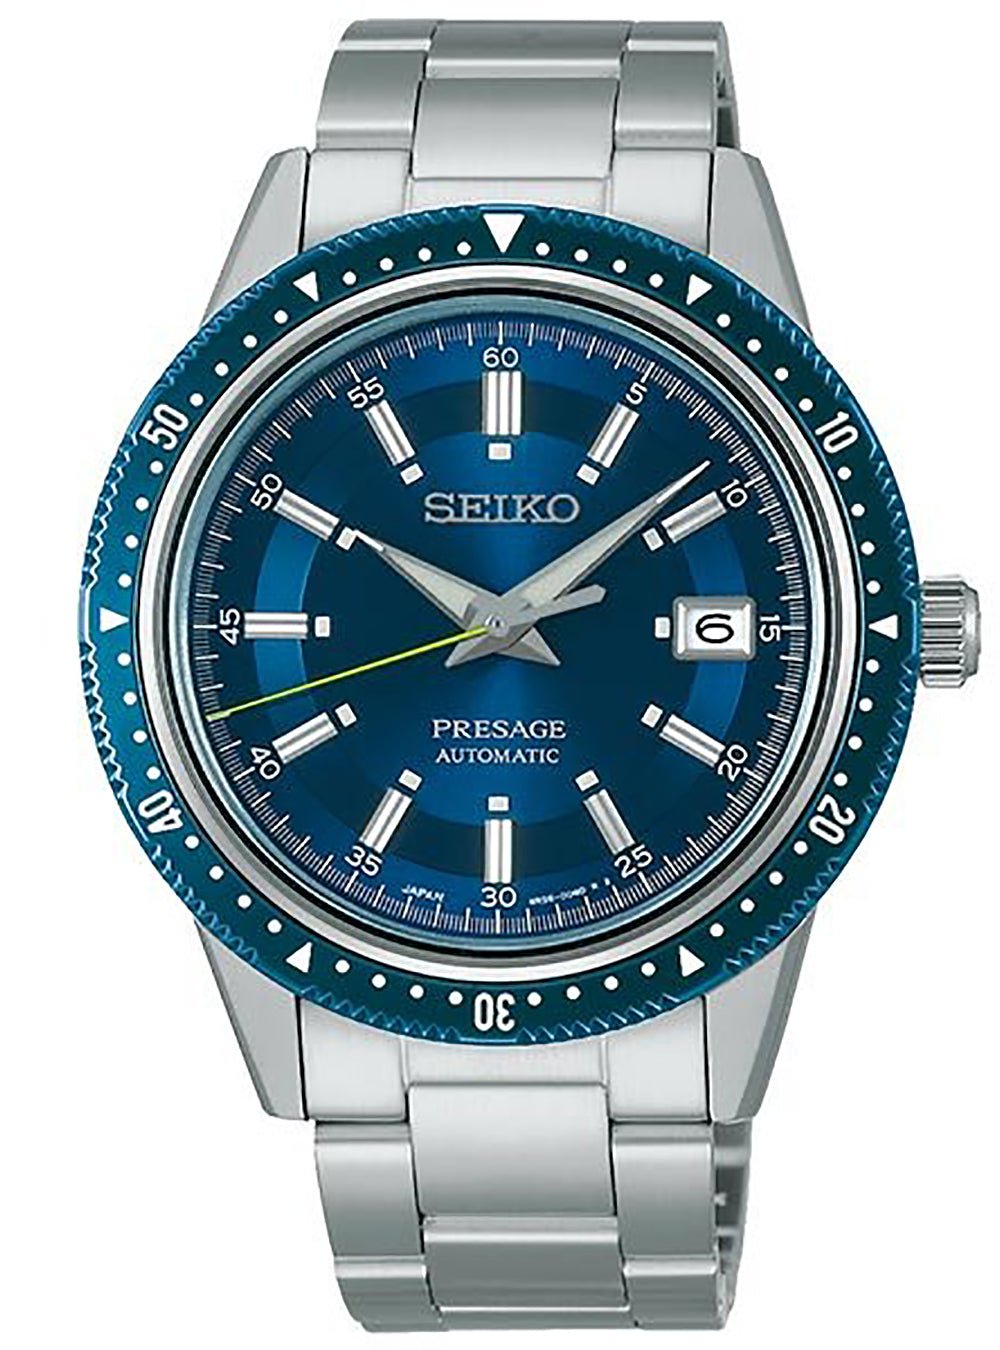 SEIKO PRESAGE JAPAN COLLECTION 2020 LIMITED EDITION SARX081 MADE IN JAPAN  JDM